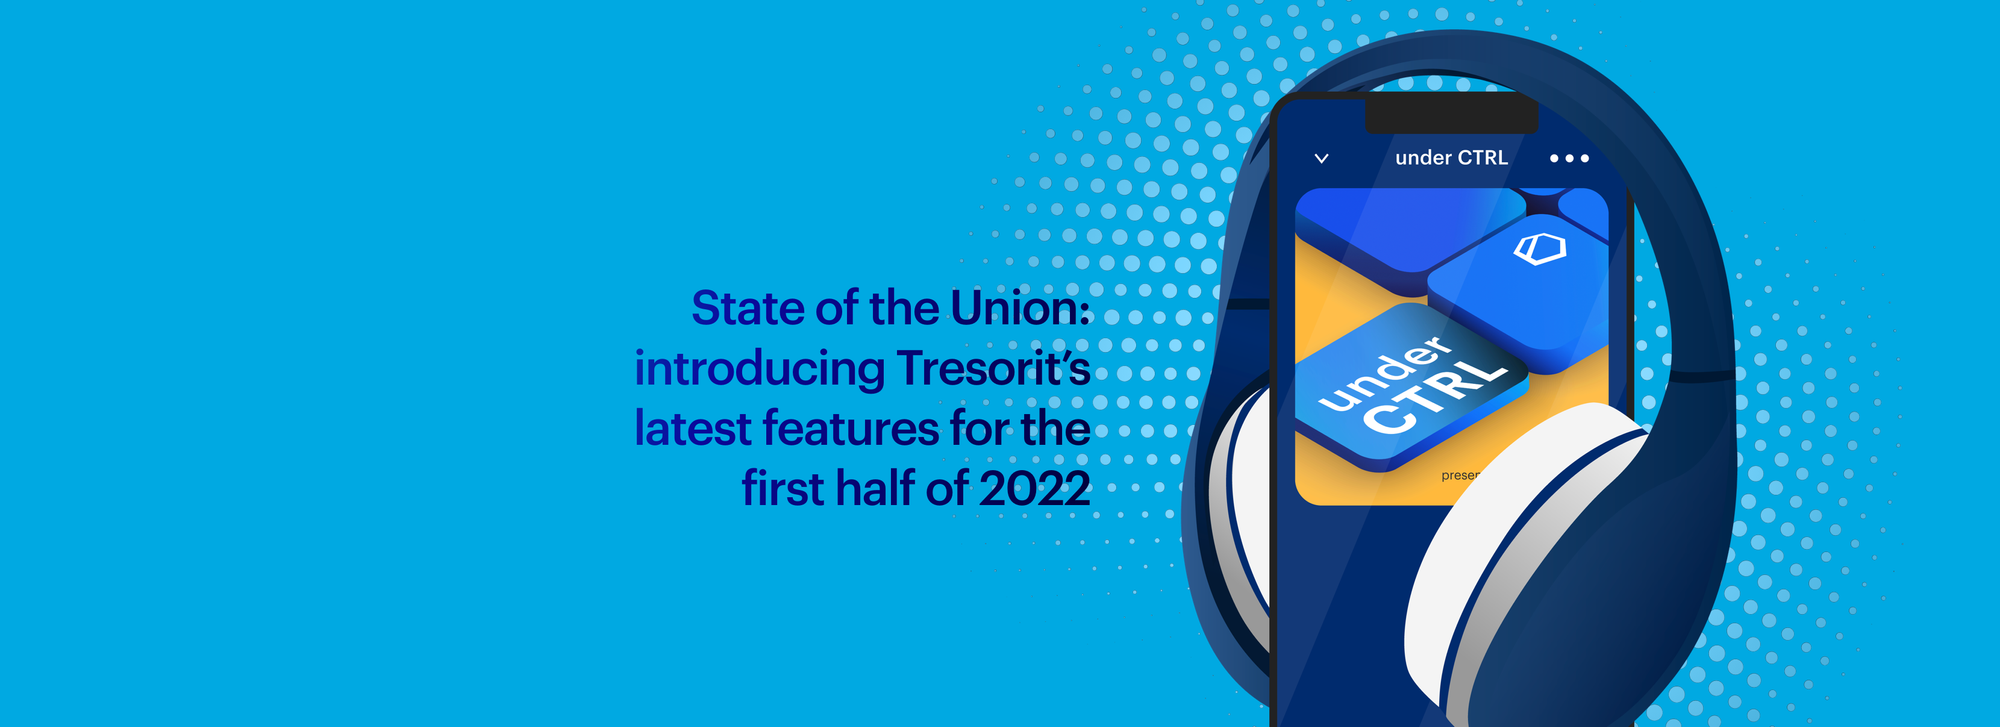 State of the Union: Introducing Tresorit’s latest features for the first half of 2022